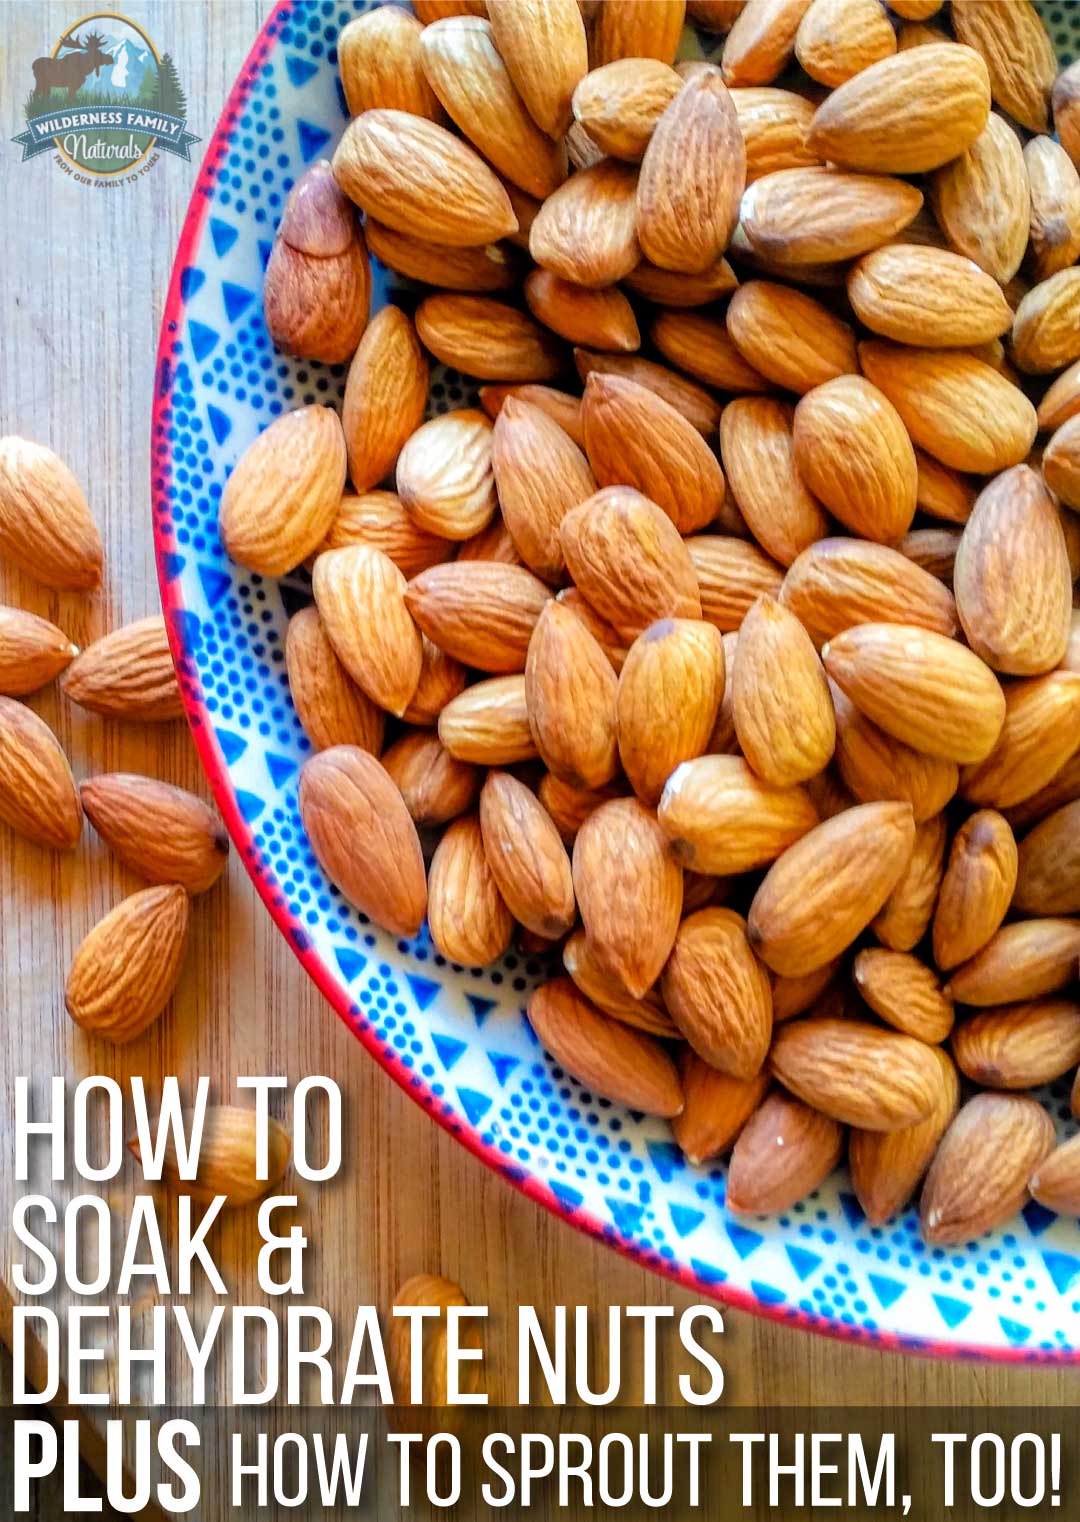 How To & Nuts how to sprout nuts, too!)